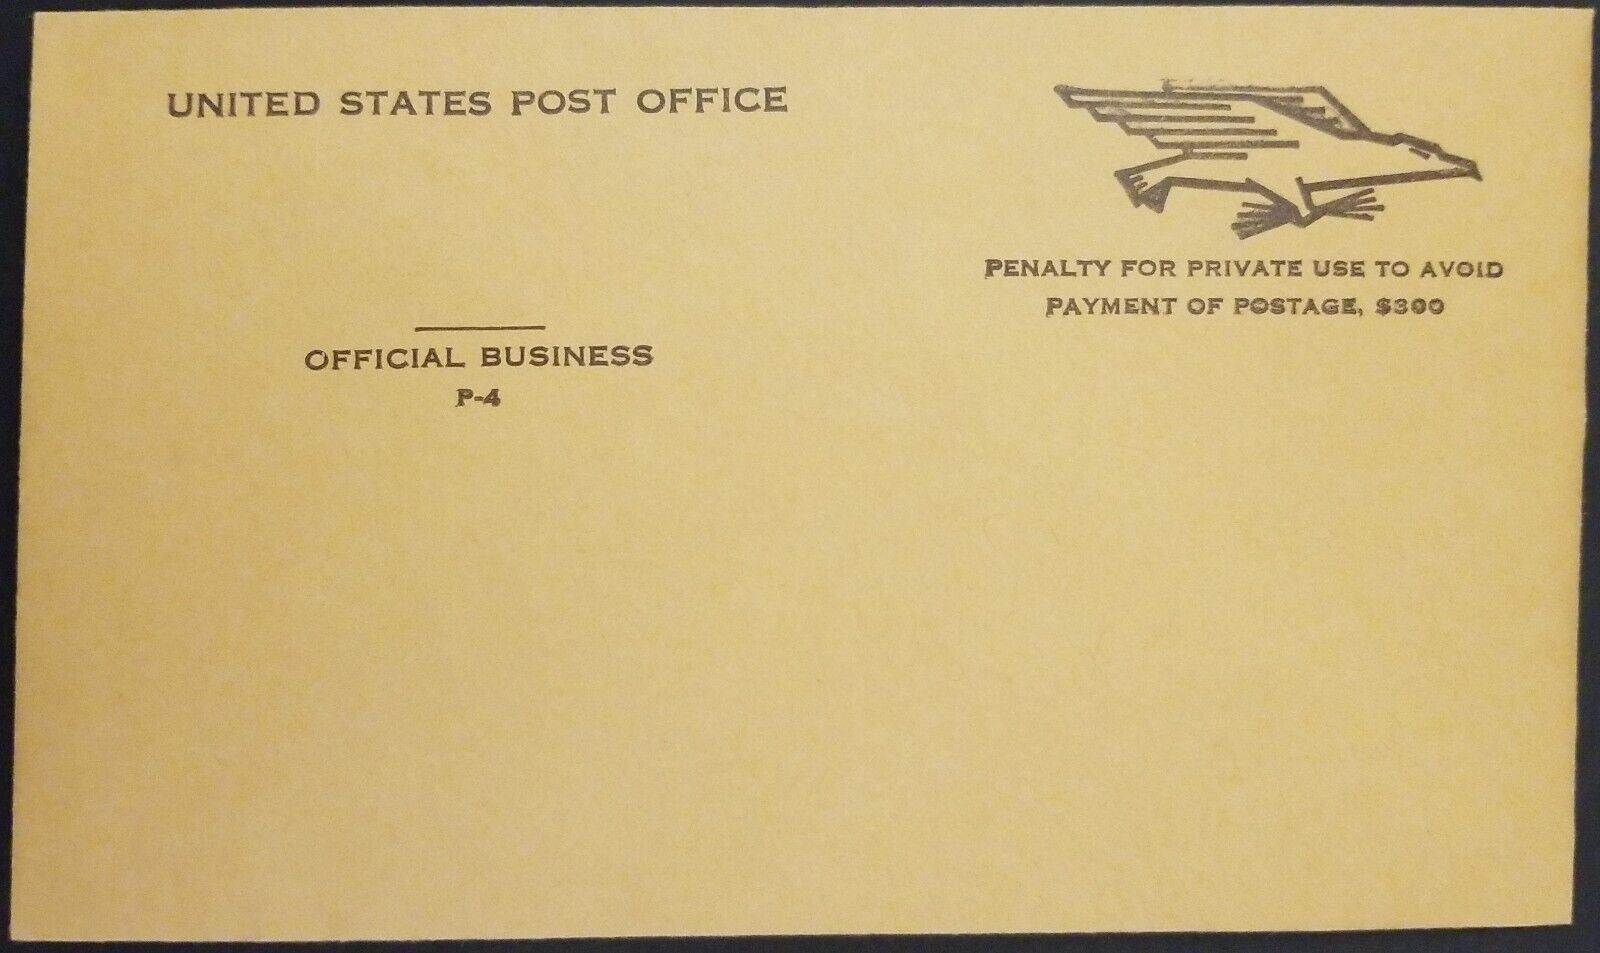 Vintage United States Post Office Official Business Cover Envelope Eagle Graphic